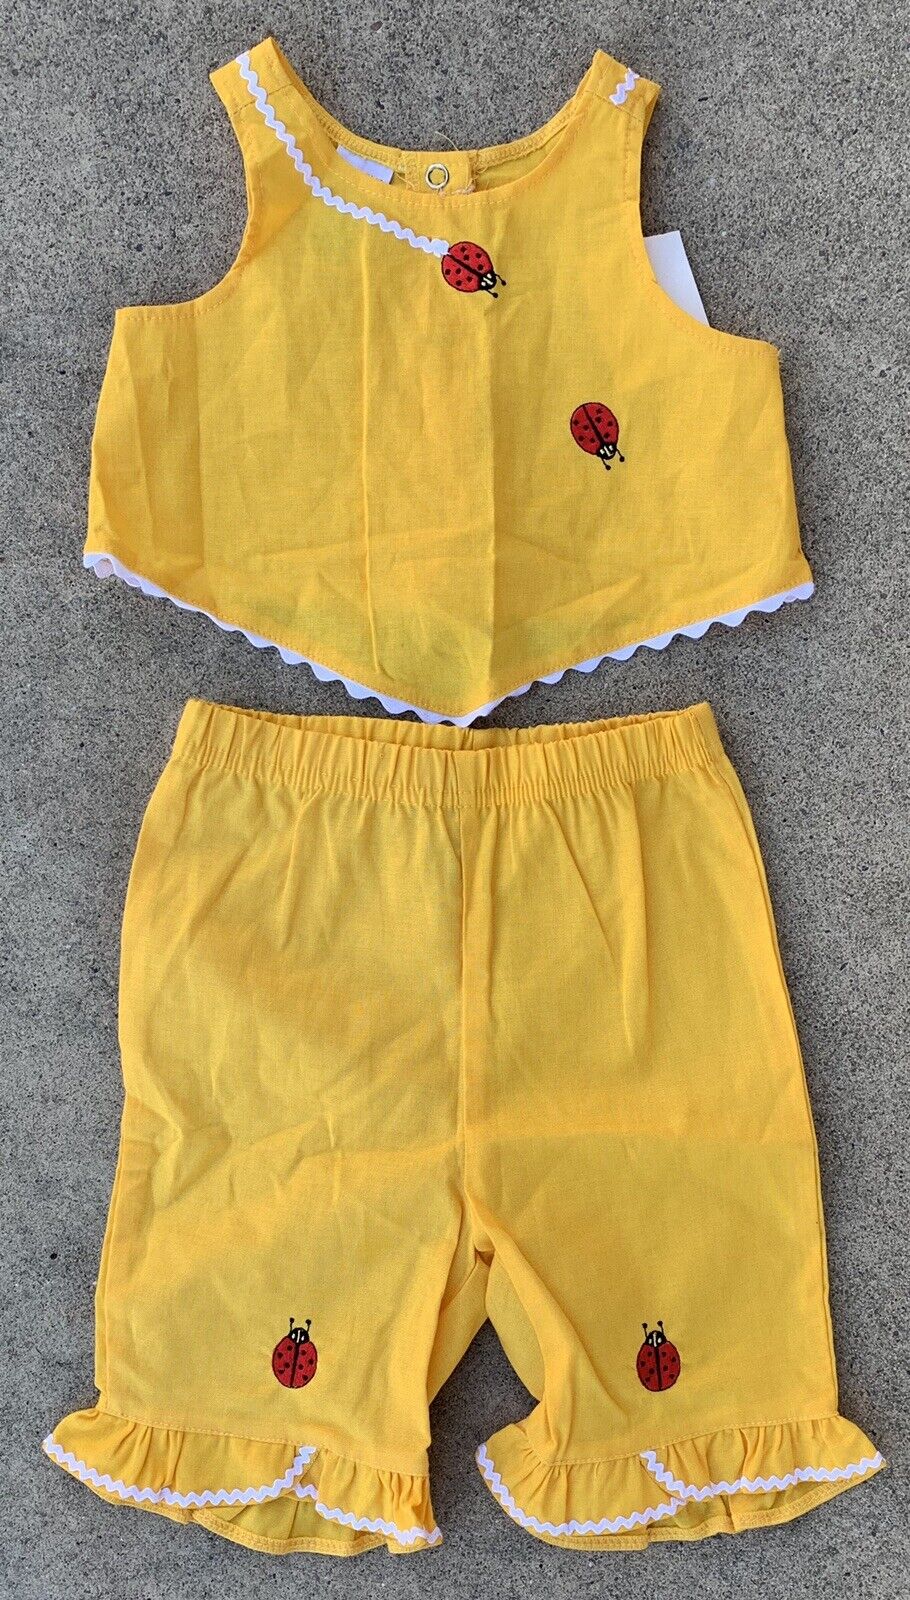 Vintage Cowboys & Angels Two Piece Outfit Yellow Embroidered Lady Bugs Ruffles